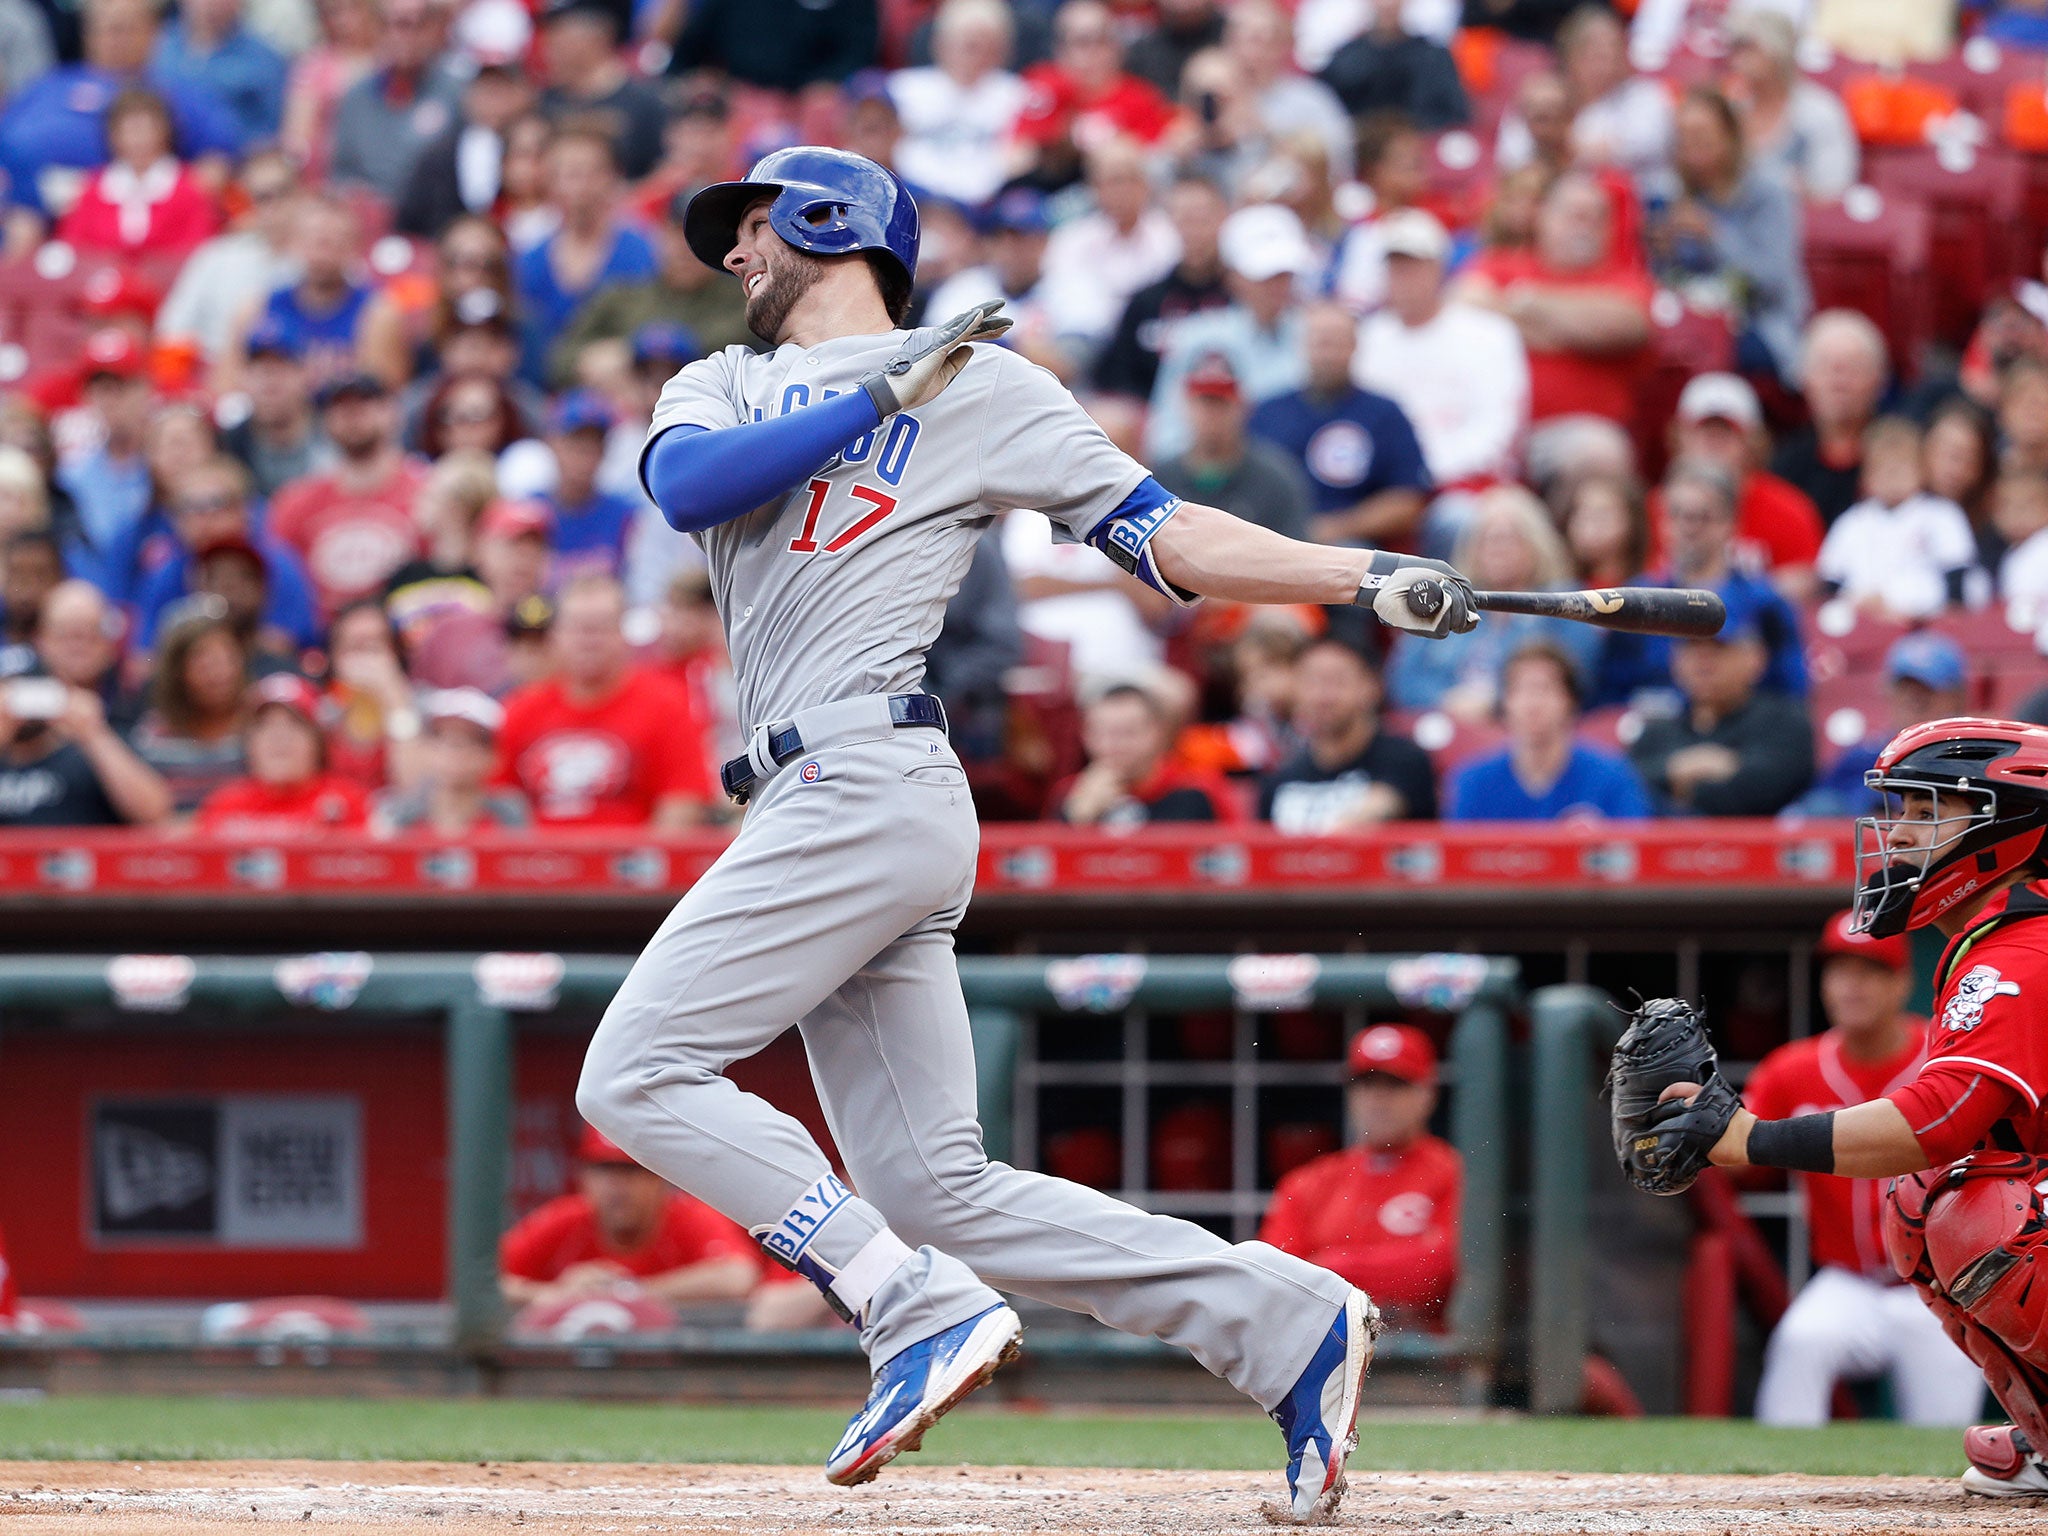 Chicago Cubs' Kris Bryant is baseball's most feared hitter